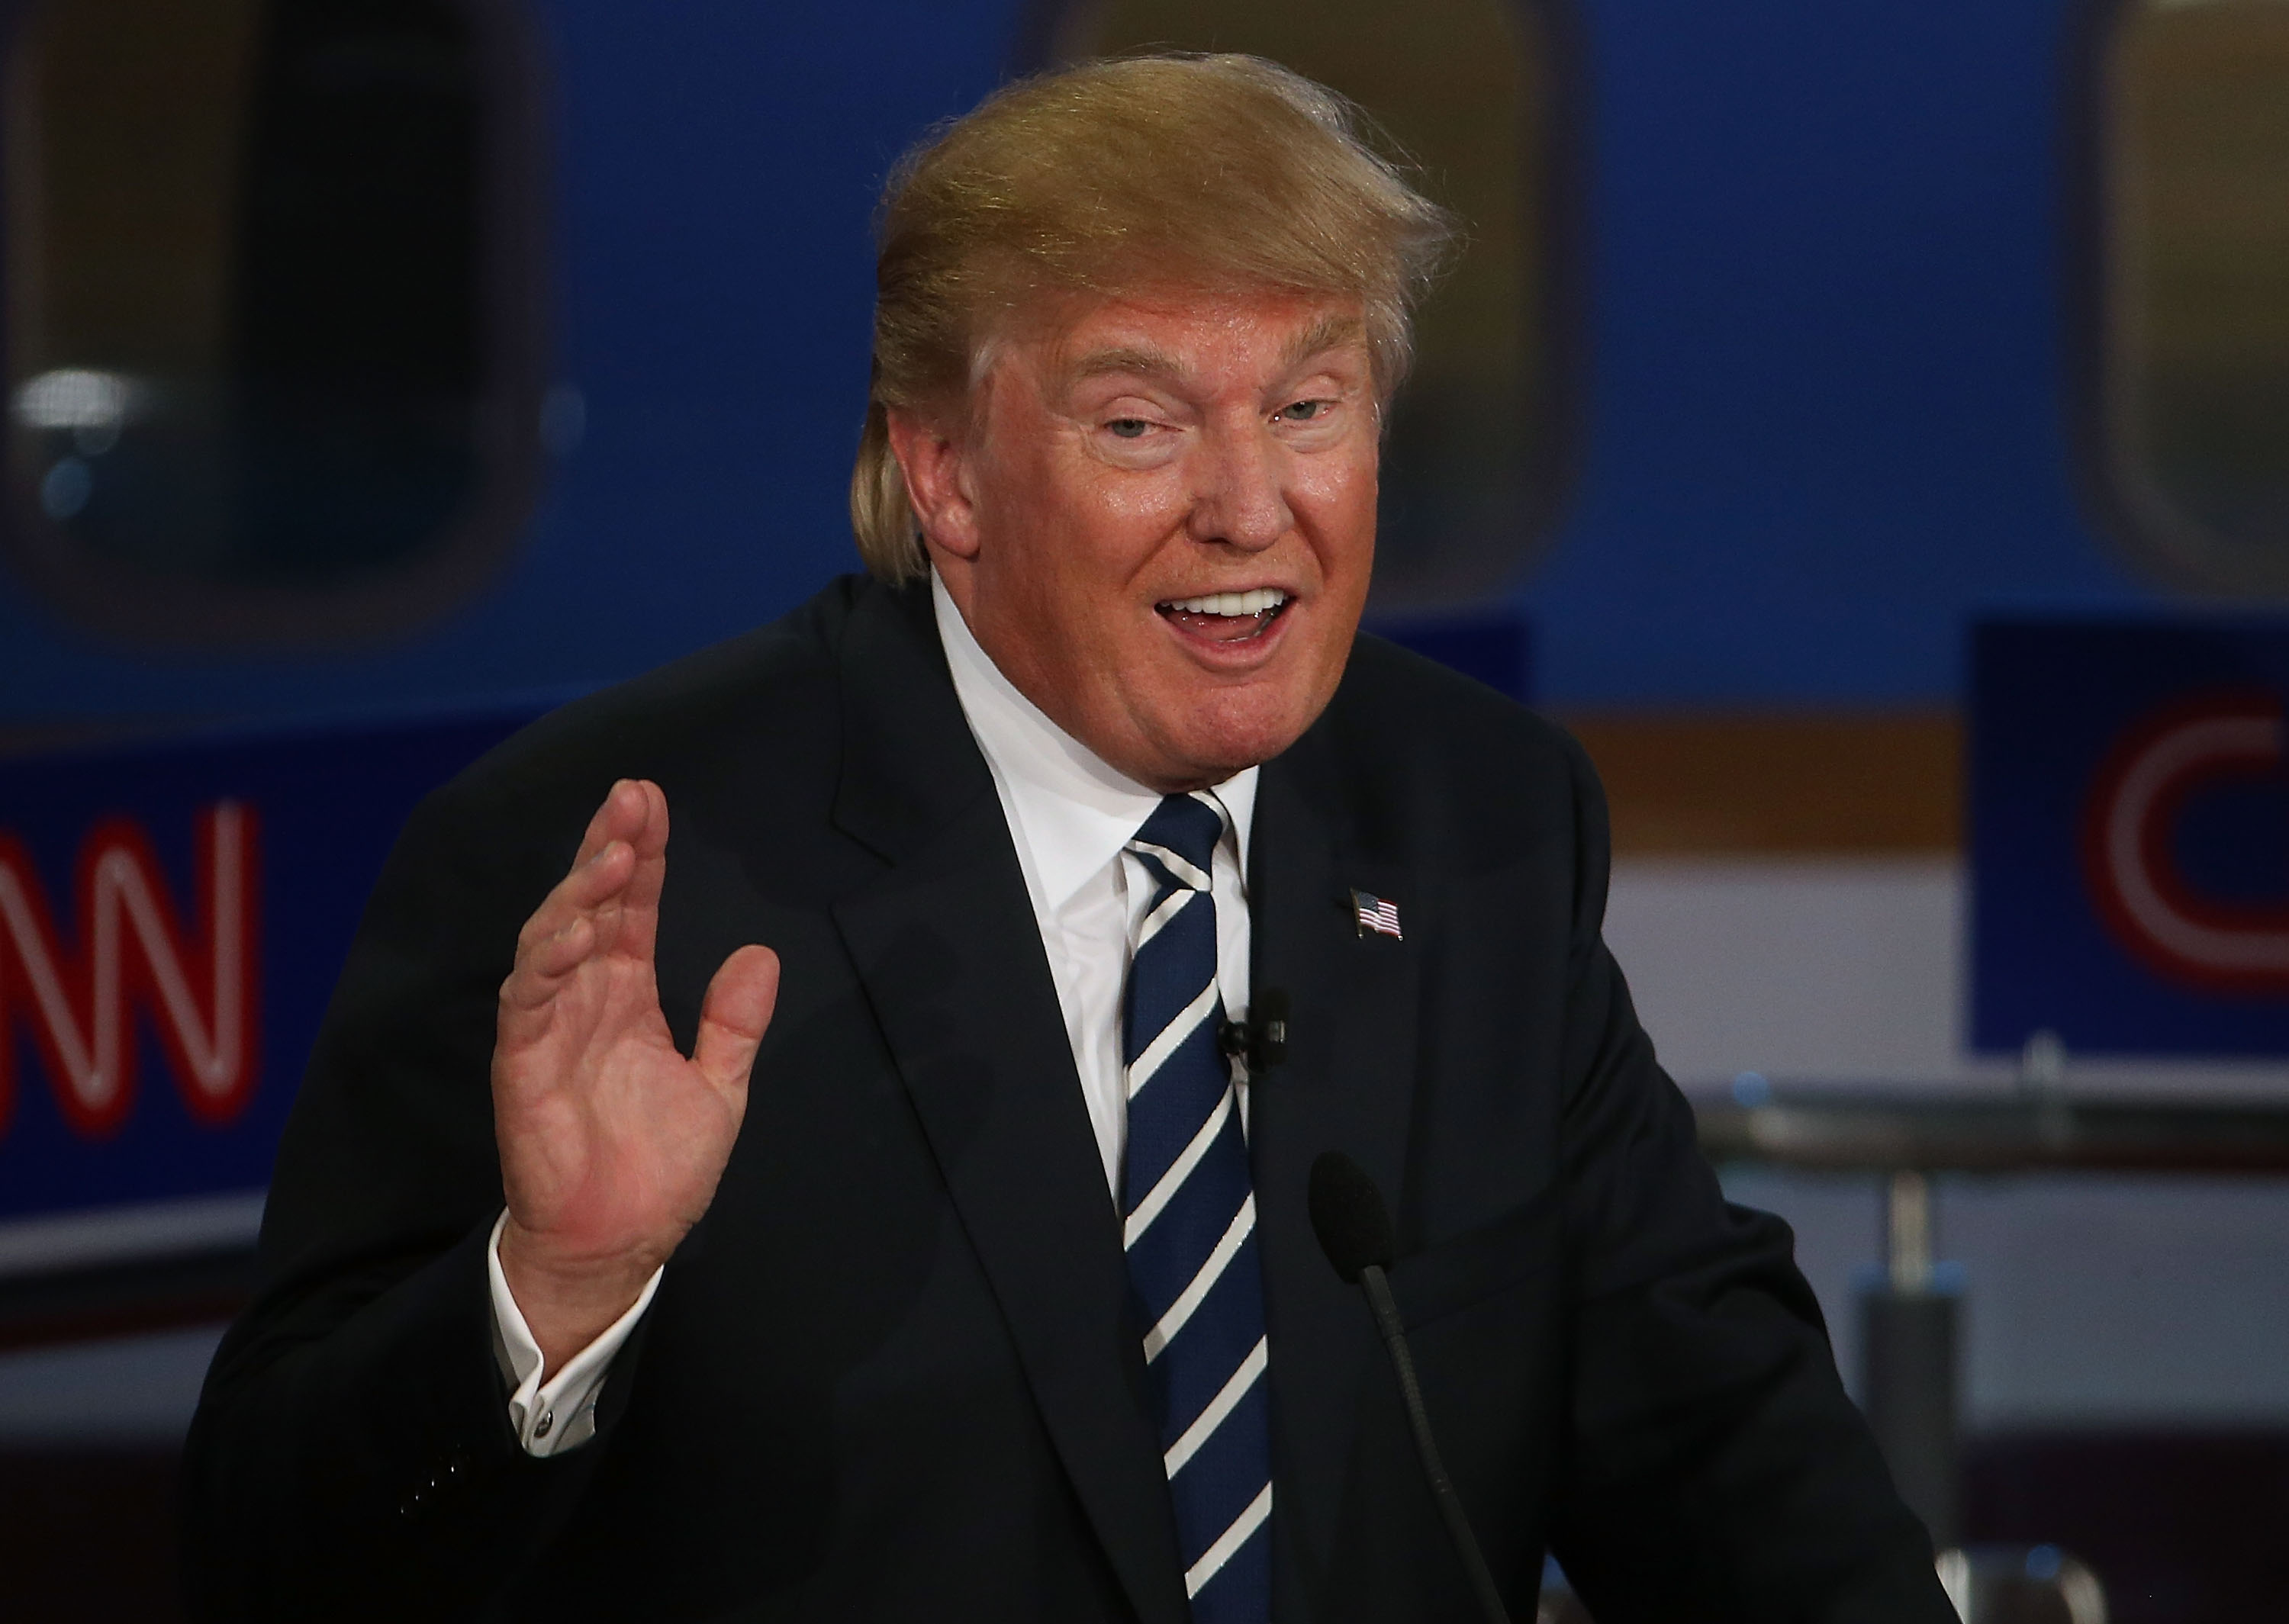  Republican presidential candidate Donald Trump takes part in the presidential debates at the Reagan Library on September 16, 2015 in Simi Valley, California.